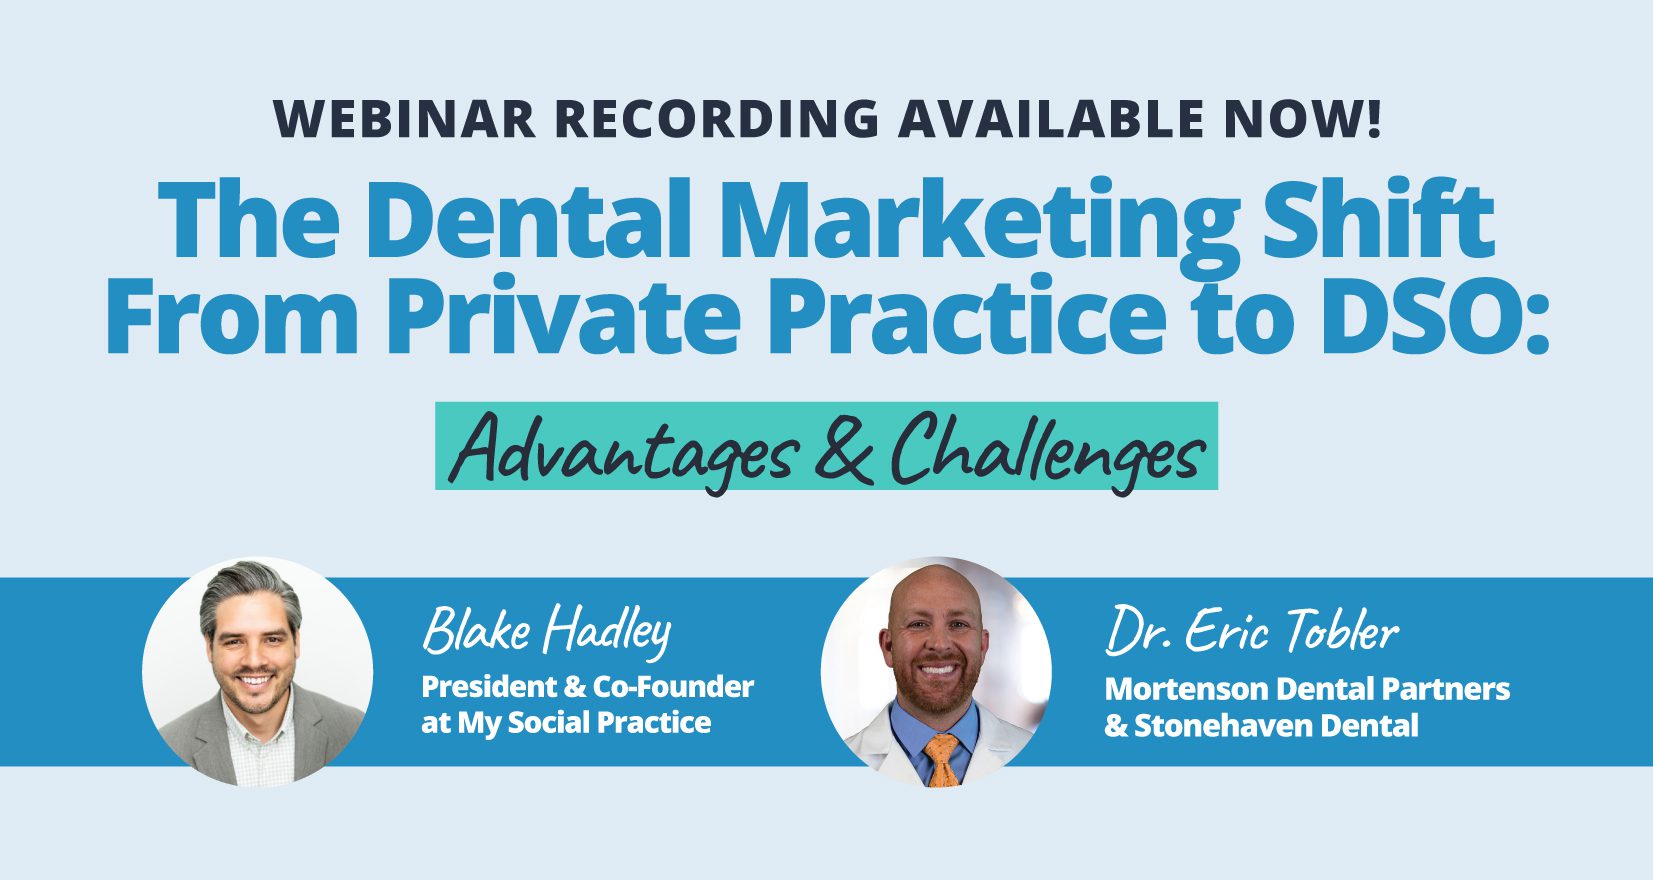 My Social Practice - Social Media Marketing for Dental & Dental Specialty Practices - AI-generated images for dentists